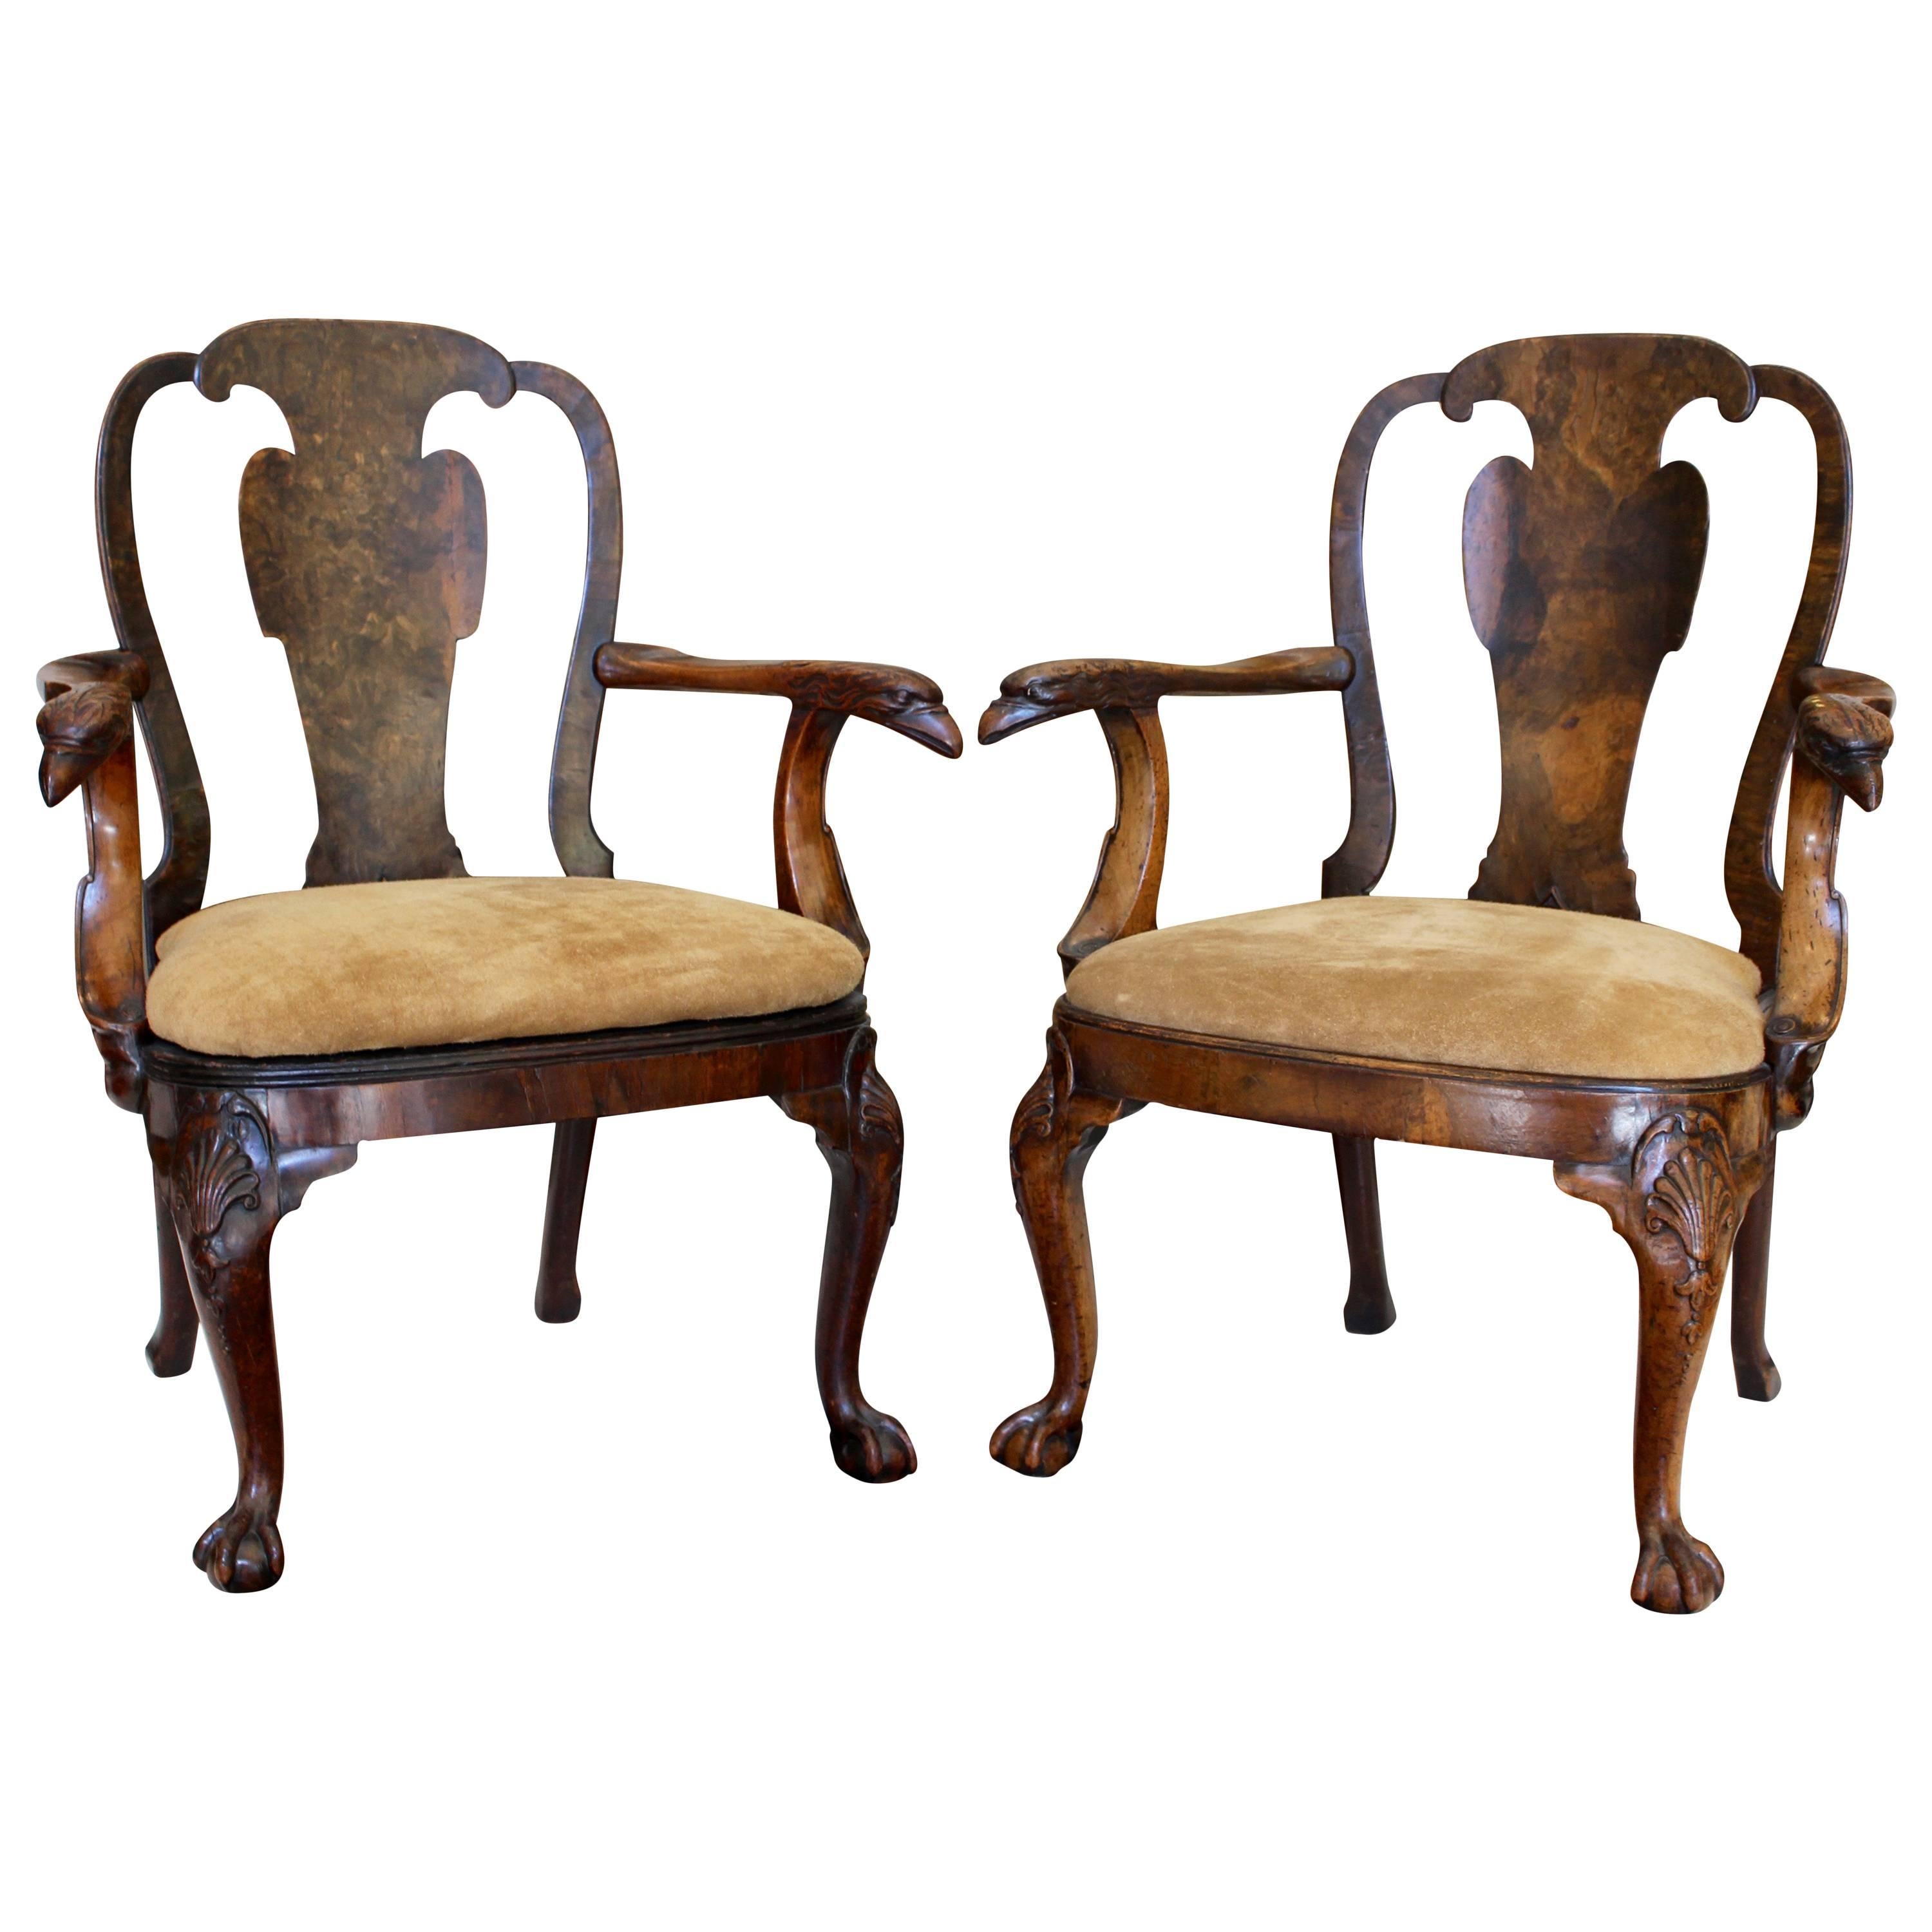 Pair of English George III 1730s Stamped Burl Walnut Armchairs with Eagle Heads